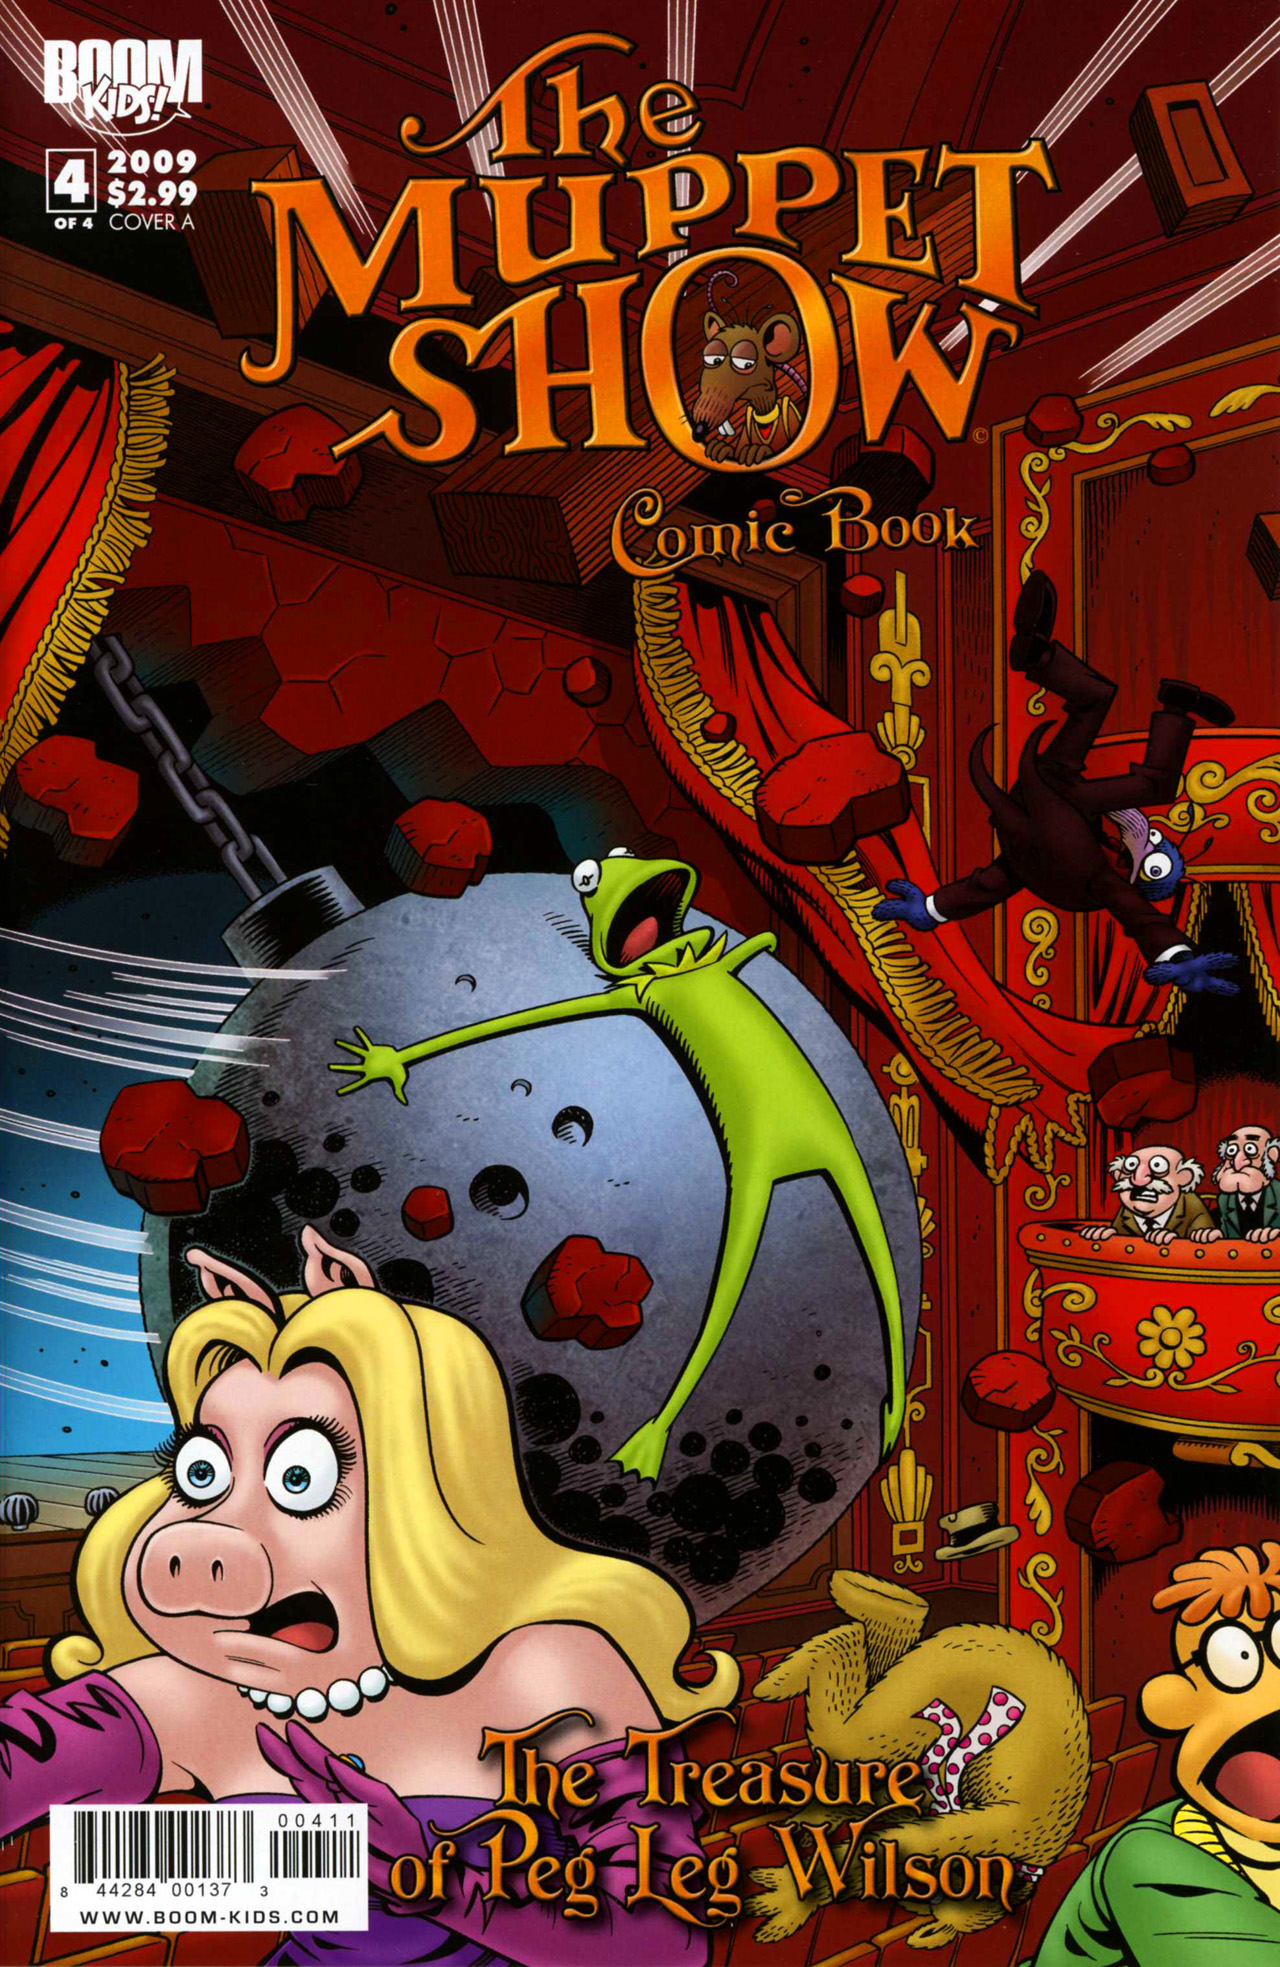 Read online The Muppet Show: The Treasure of Peg-Leg Wilson comic -  Issue #4 - 1